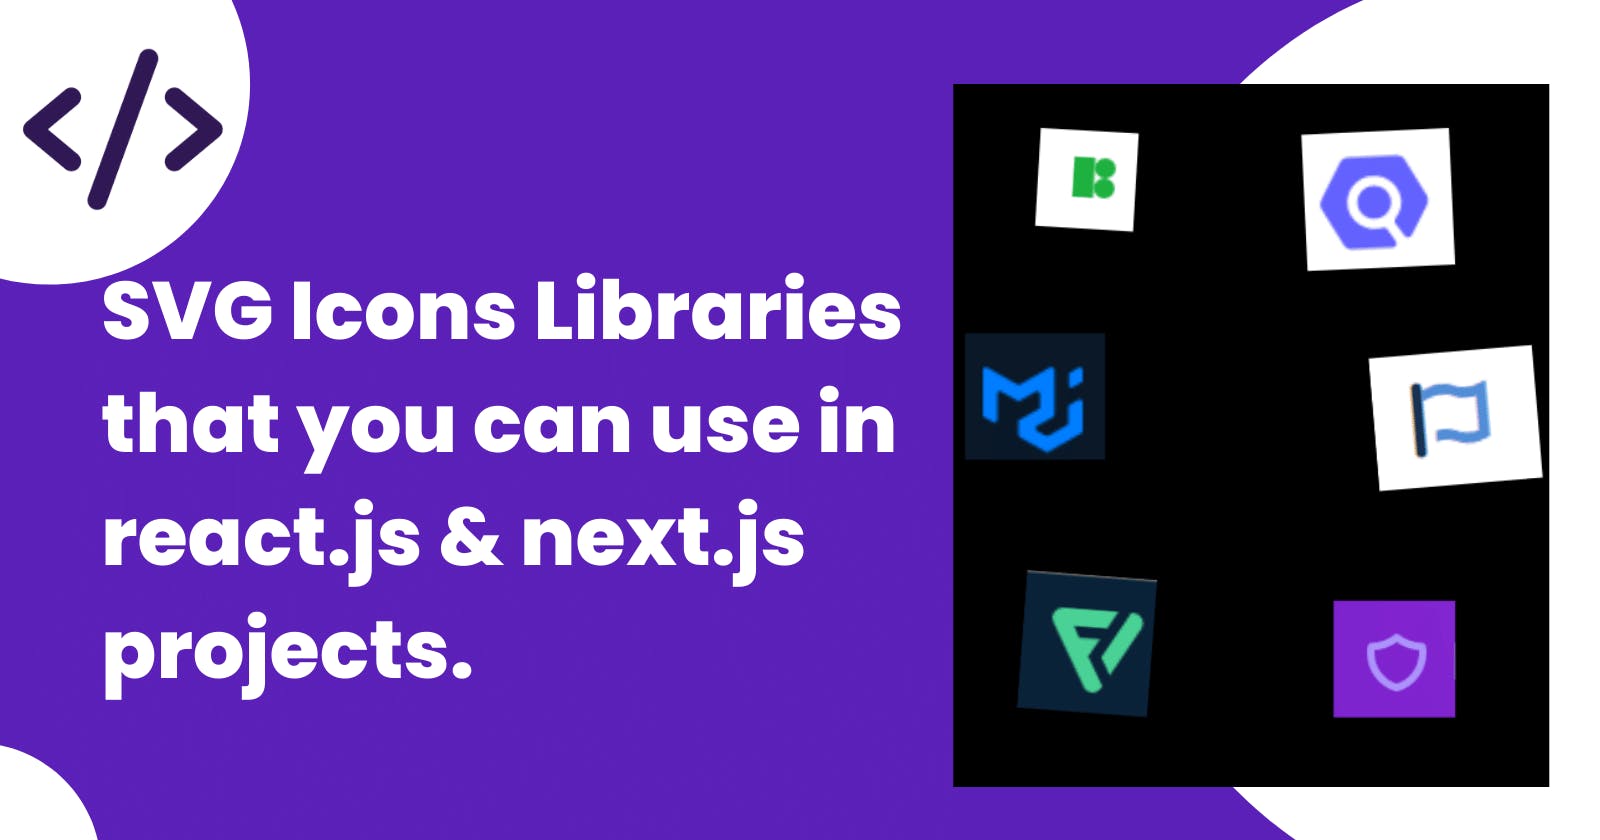 SVG Icons Libraries that you can use in react.js &next.js projects.